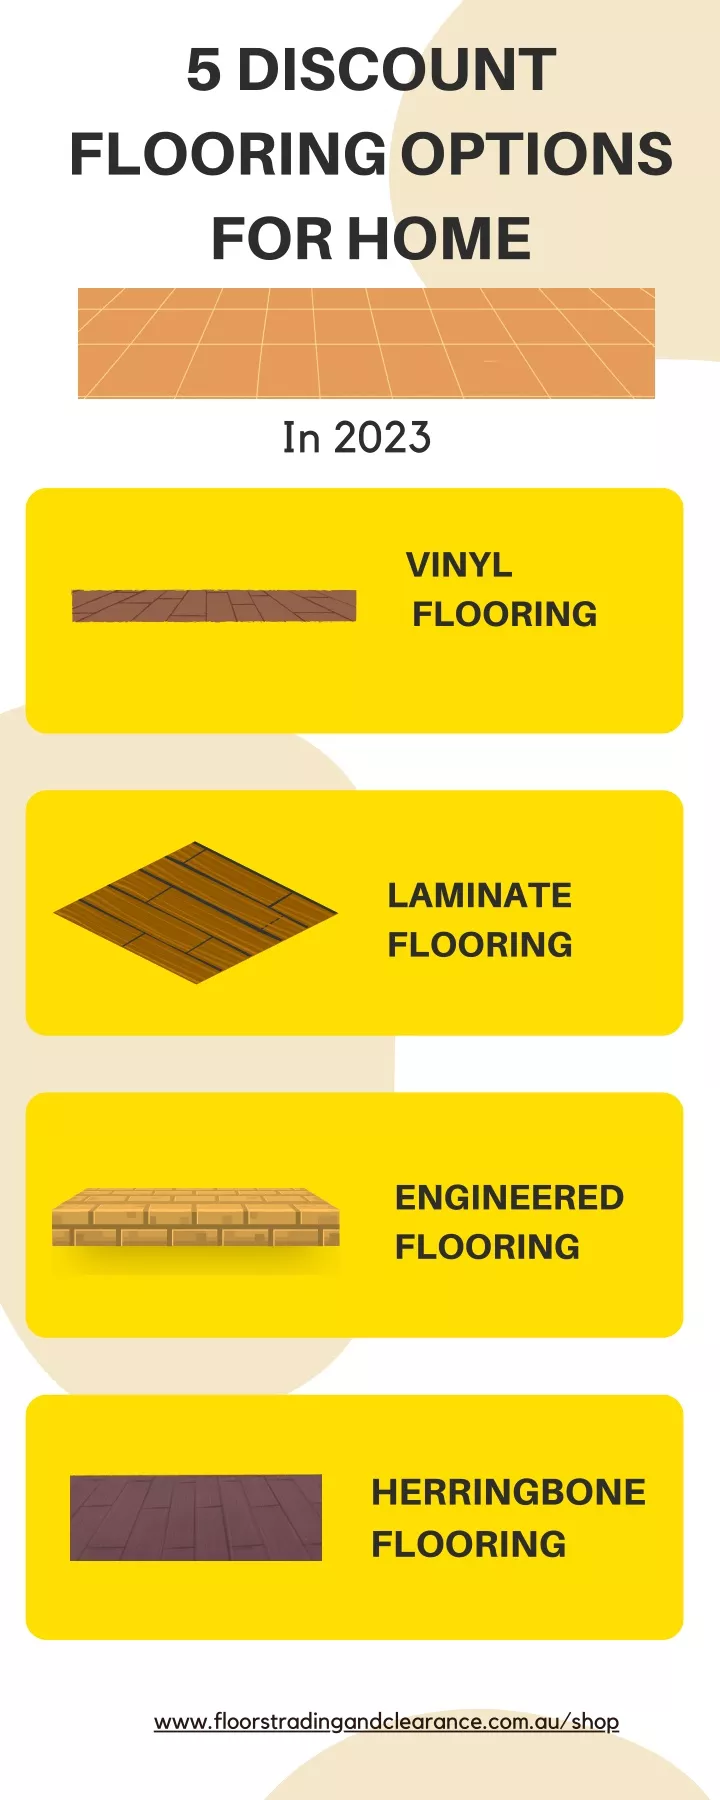 5 discount flooring options for home